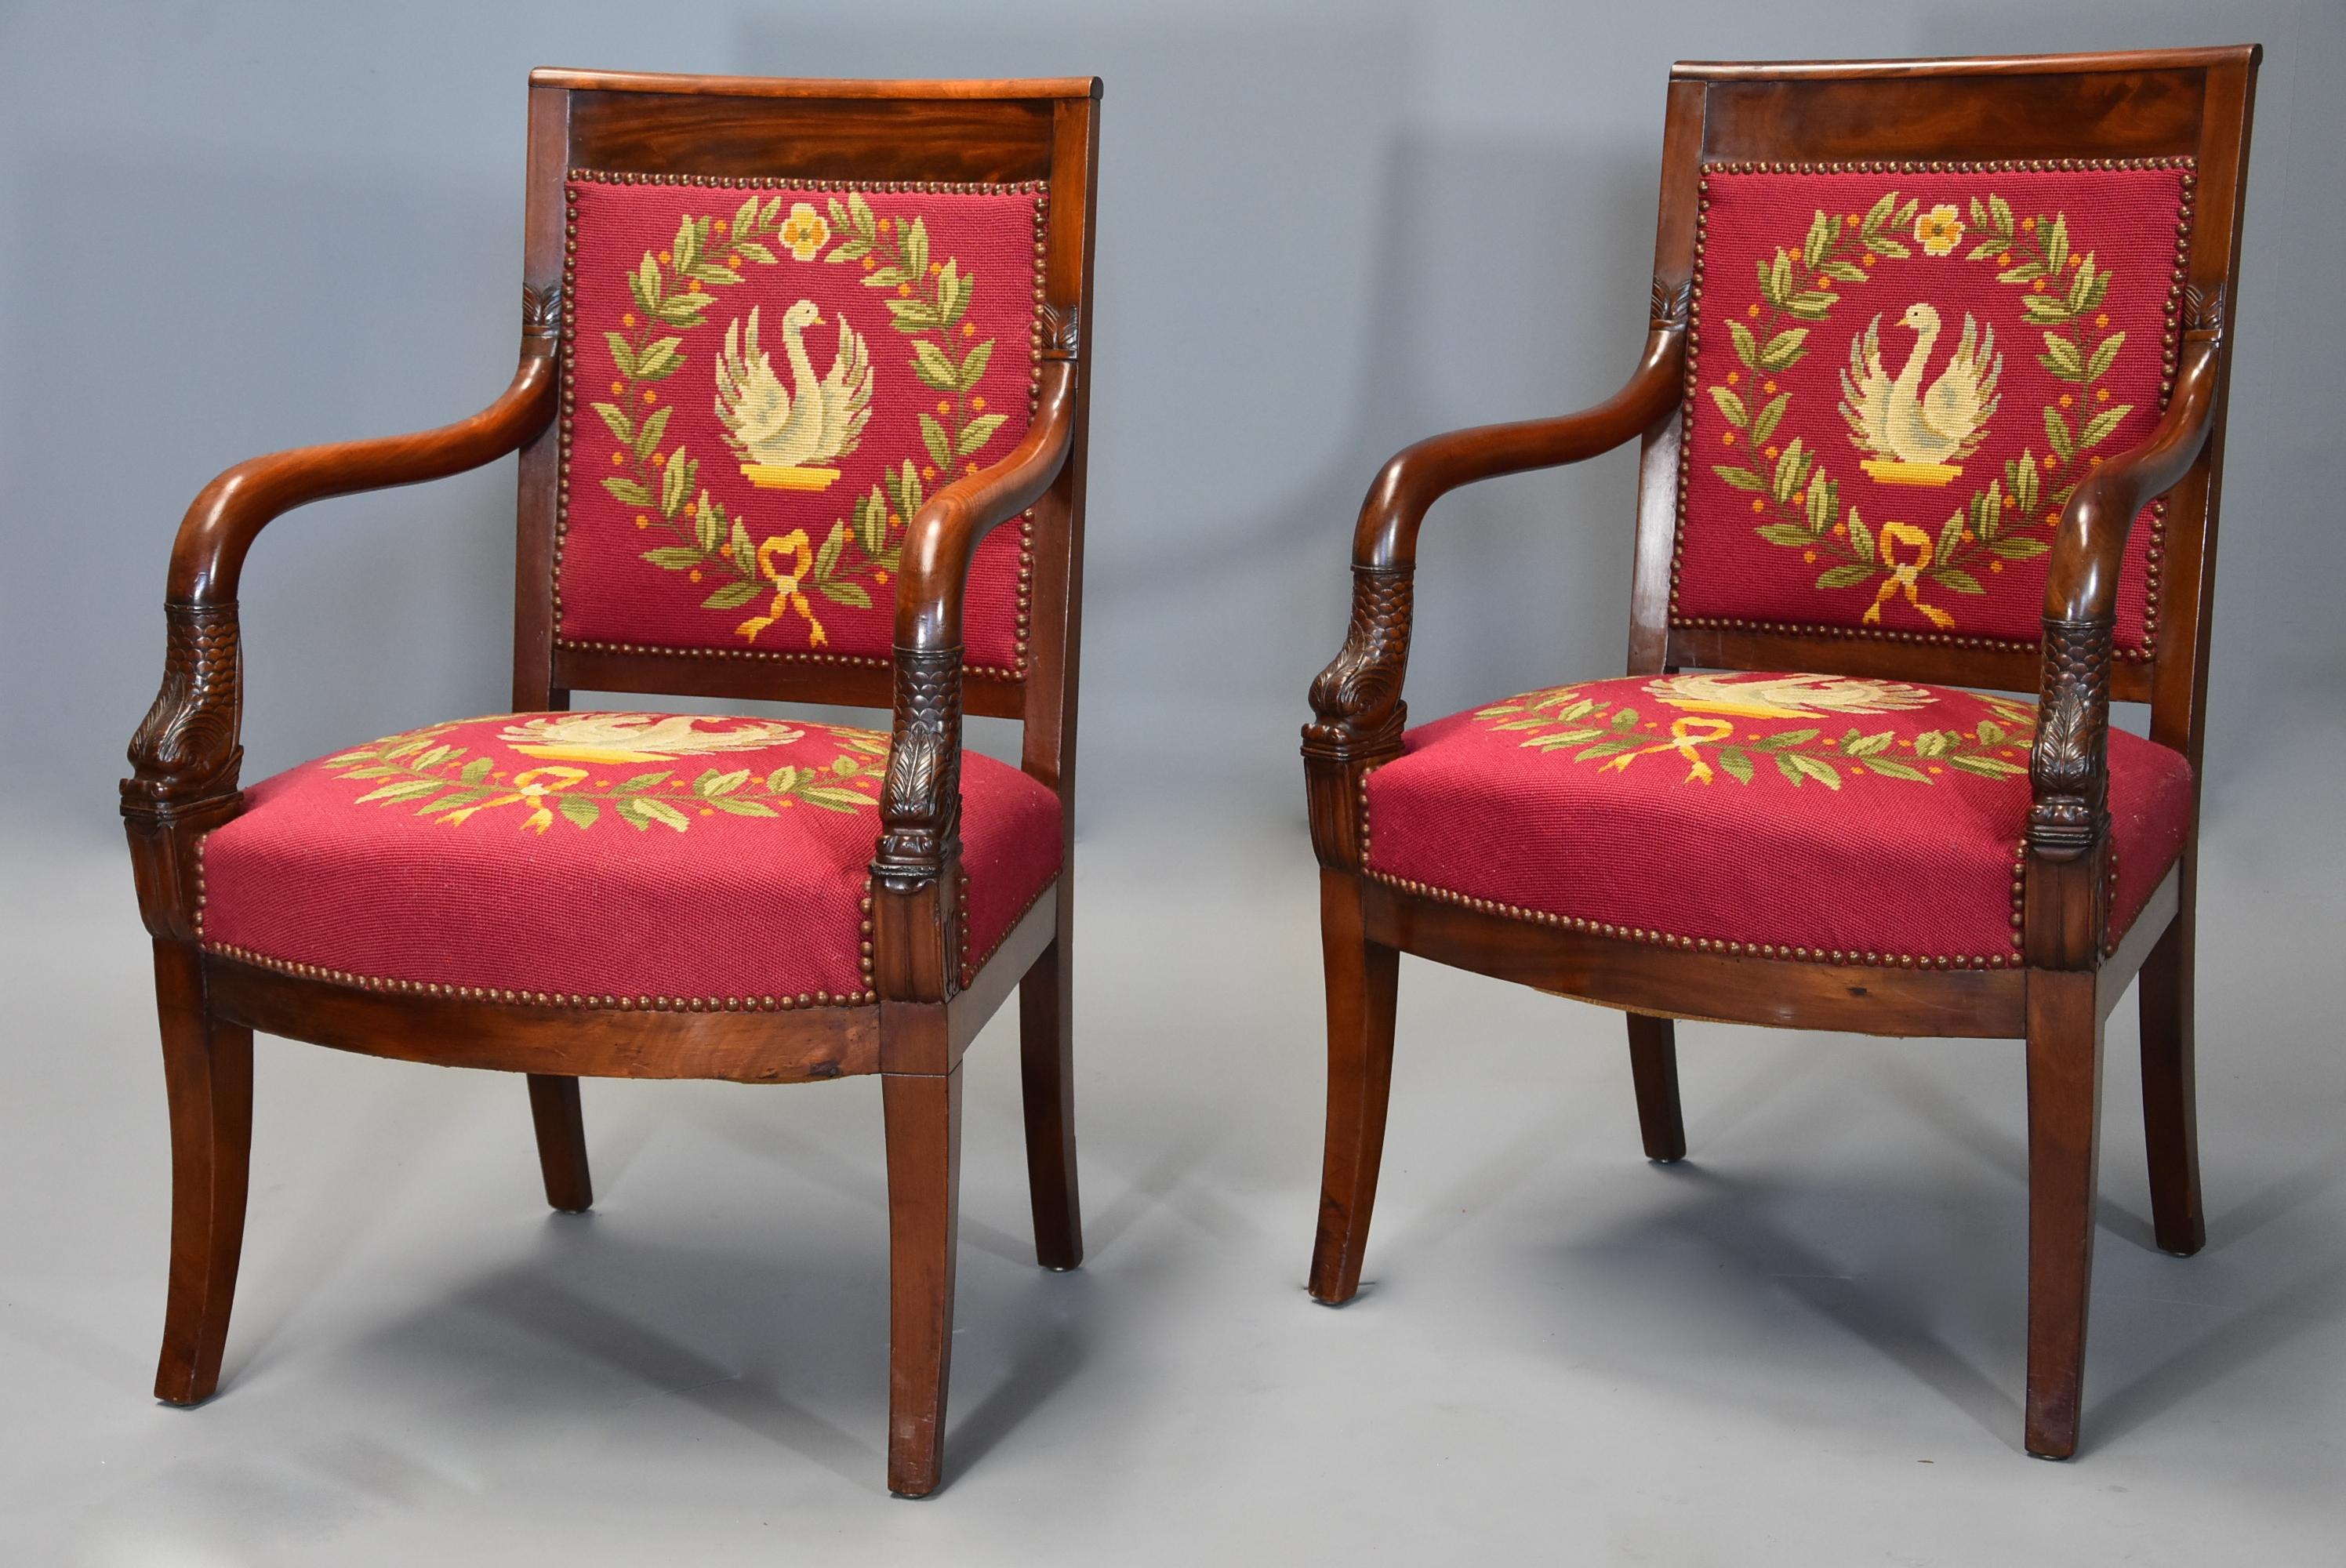 A pair of 19th century (circa 1830) French Empire mahogany fauteuils (open armchairs) of good quality with wool work upholstery of Napoleonic symbols.

This pair of chairs consist of a top rail leading down to shaped arms with carved foliate